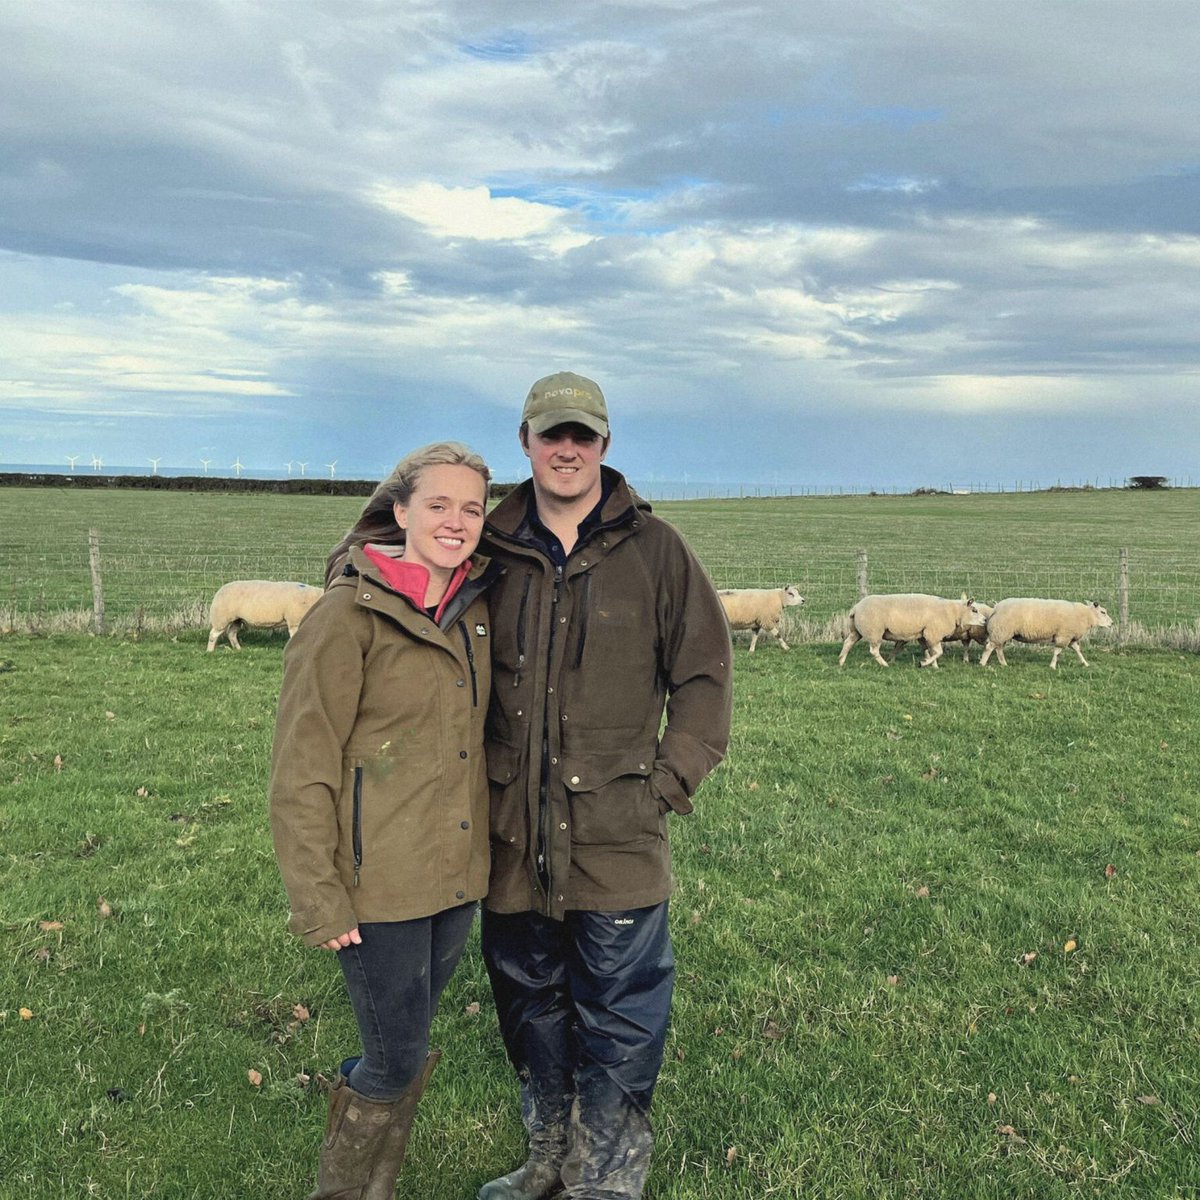 We're delighted to announce the two winners of the Rural Start-Up Fund, our business start-up grant programme with @countrysidefund 🌿 Congratulations to Beeches Meats and Helme Edge Vineyard! 👏 Learn more: royalcountrysidefund.org.uk/how-we-help/ru…